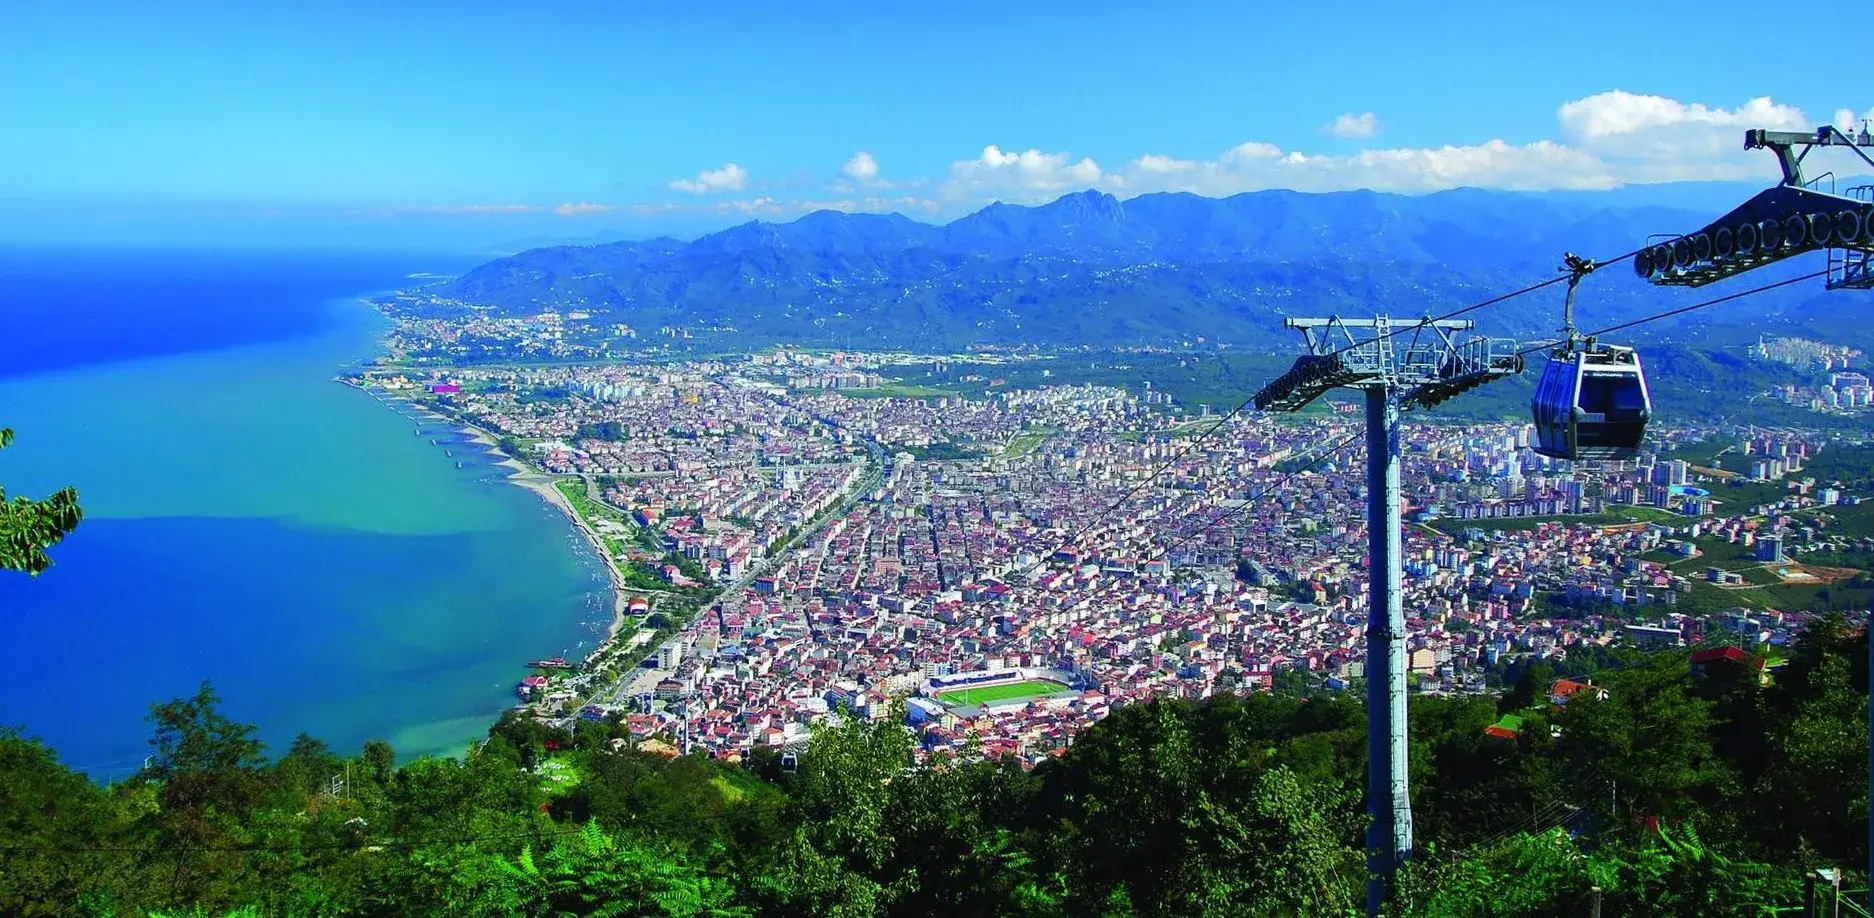 Alternative Places to Visit, Accommodation, Food and Drink Suggestions in Ordu